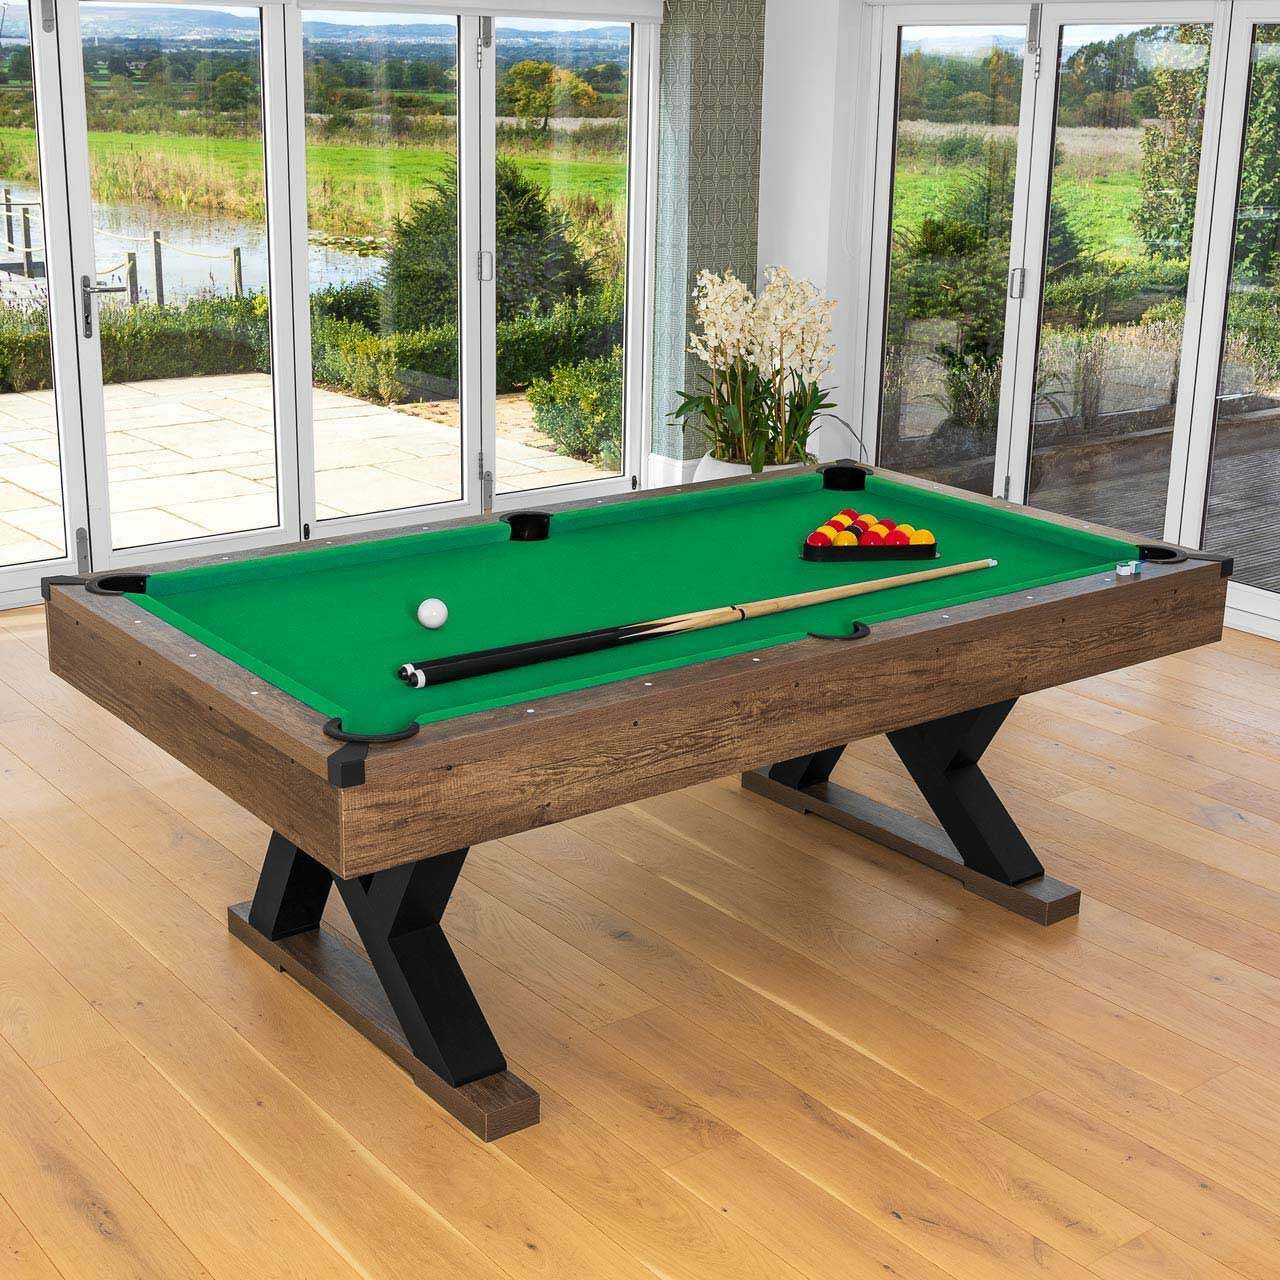 denise downing recommends Pool Table Picture